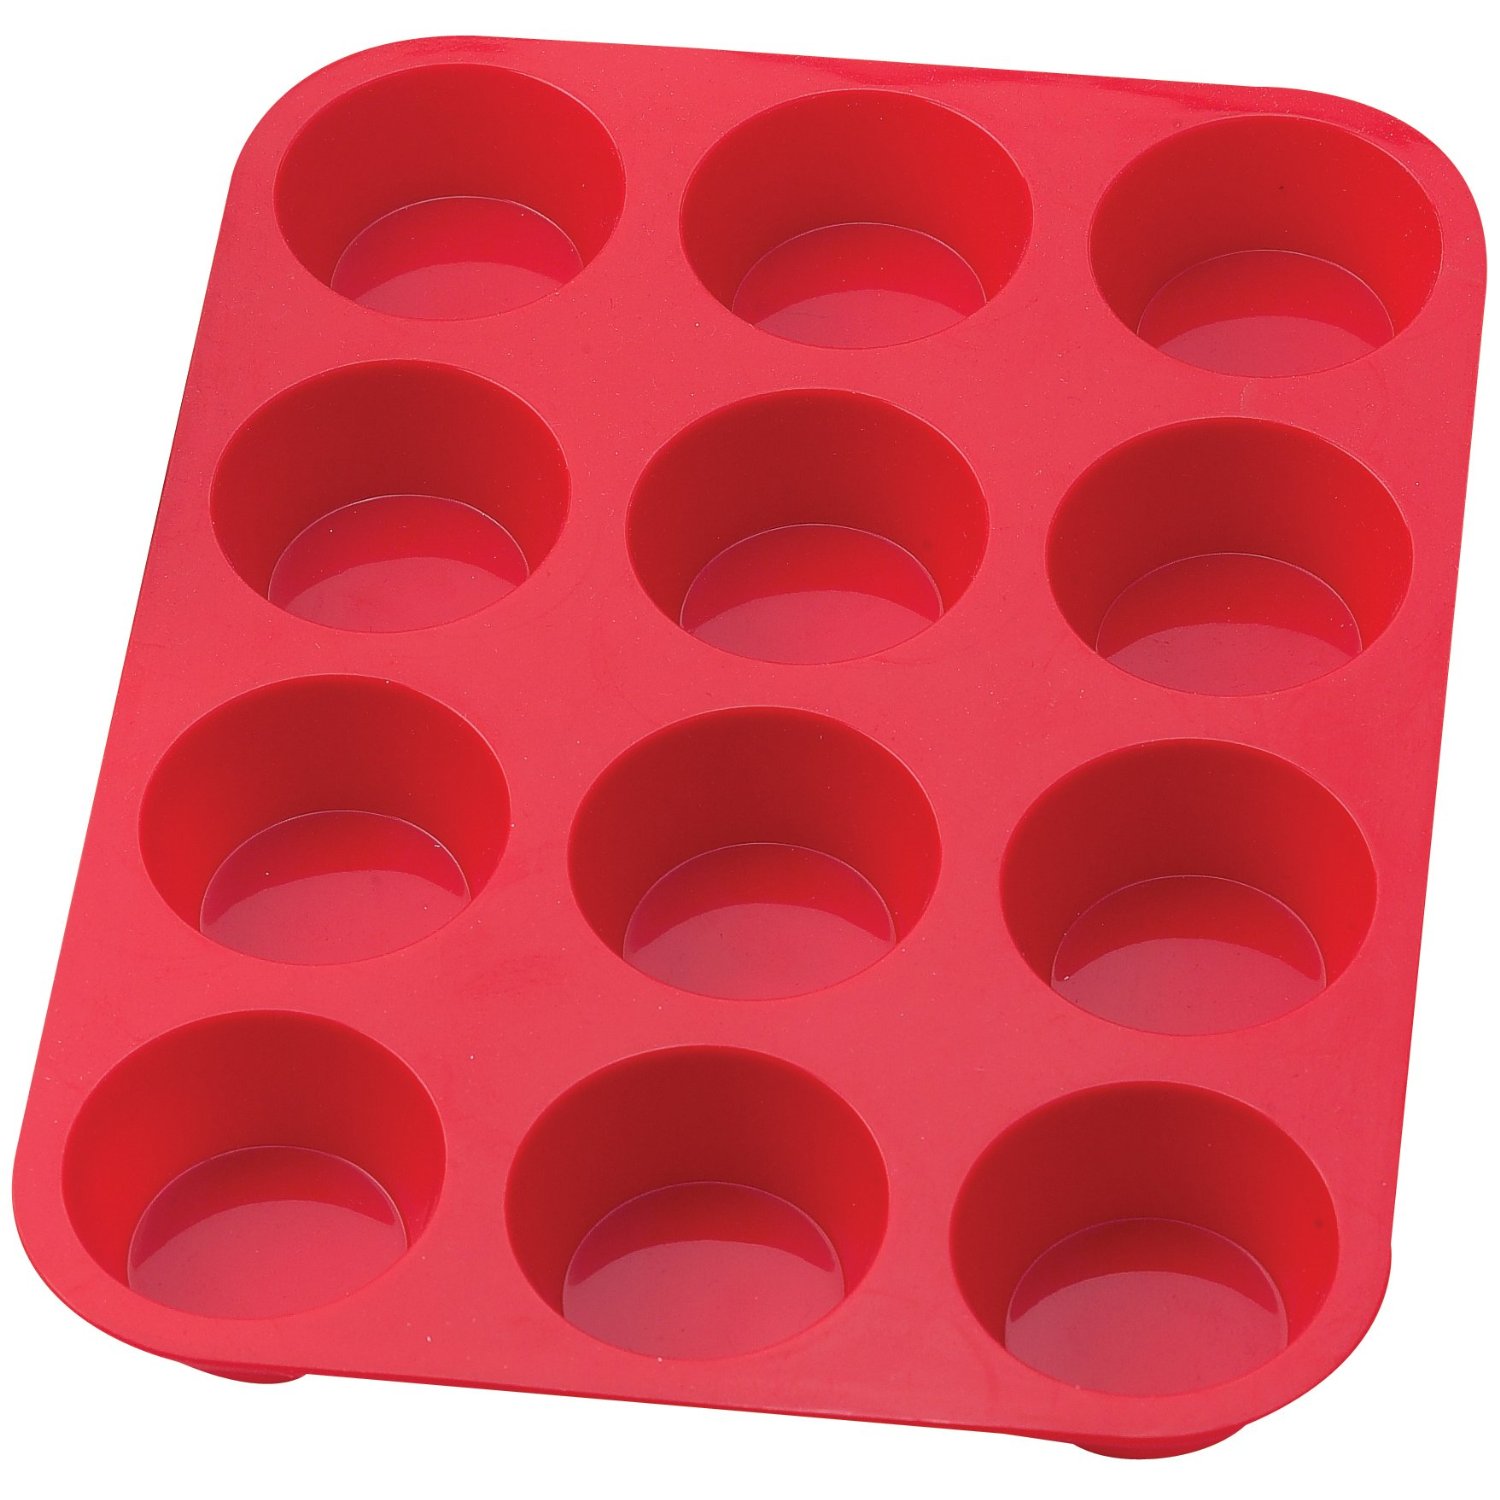 Silicone Bakeware Review 72